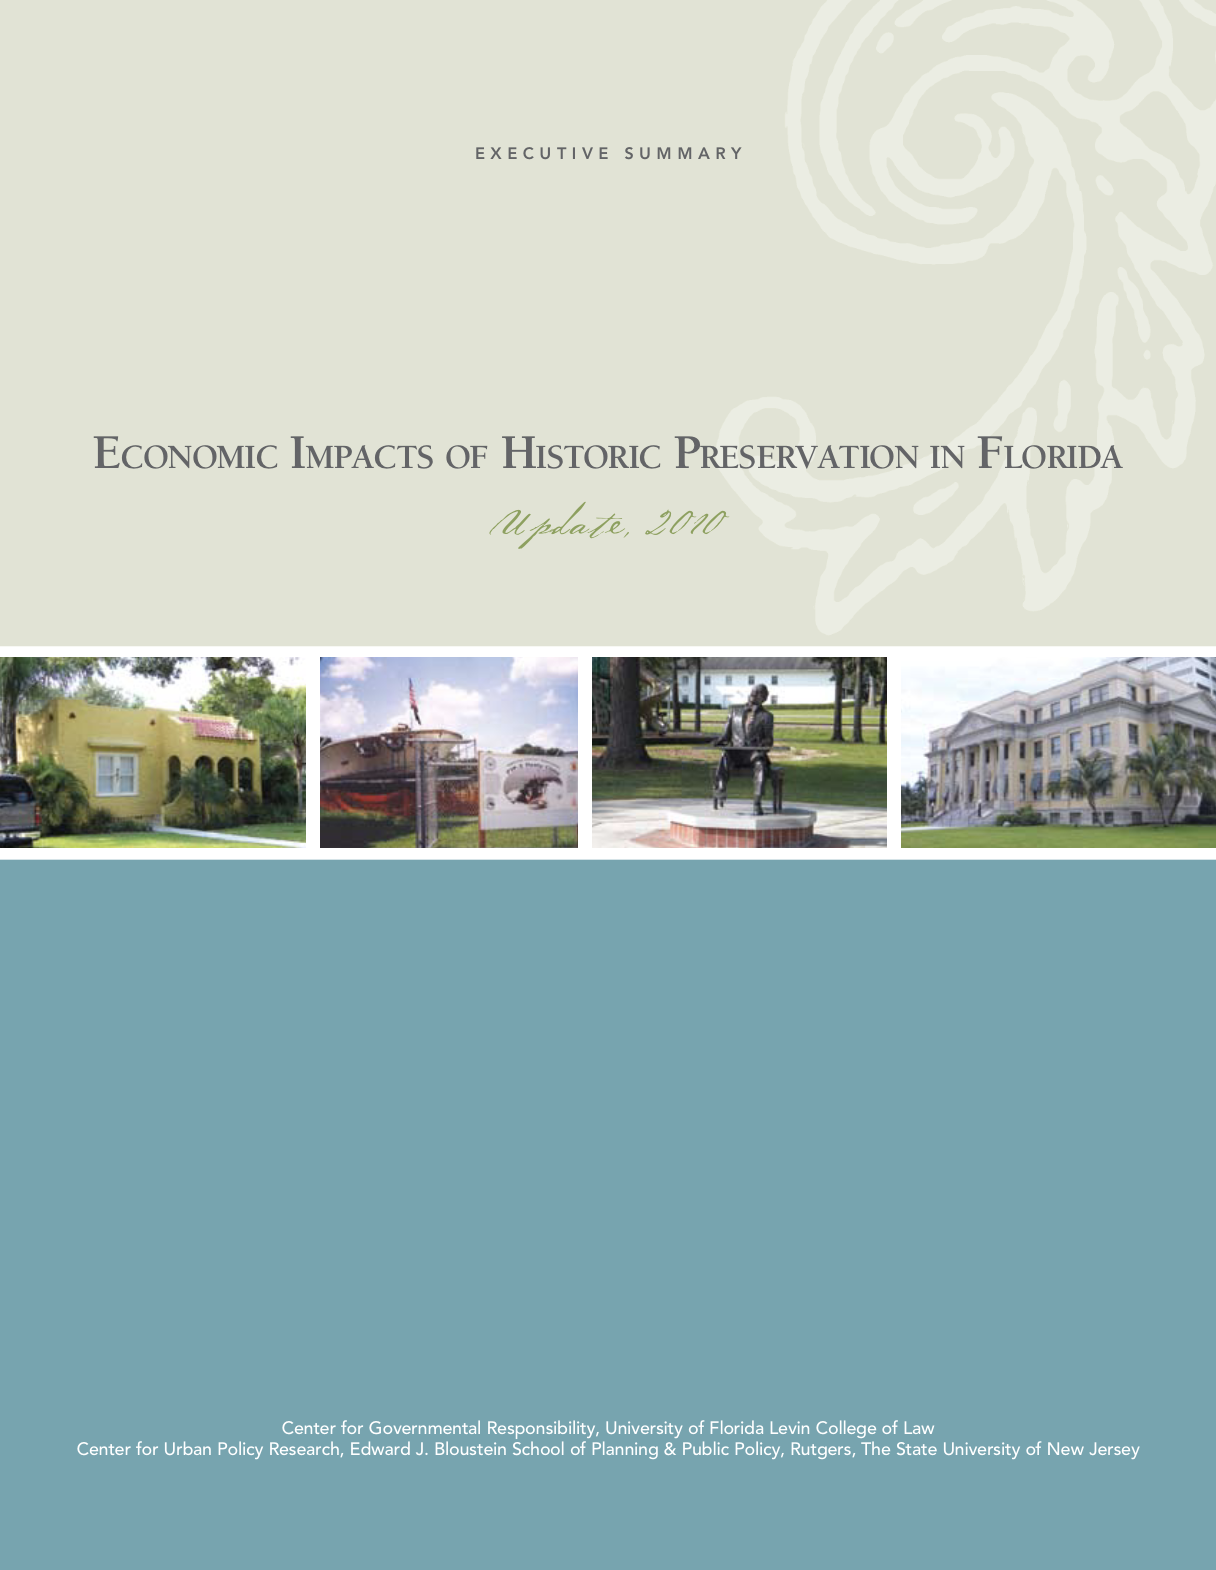 Executive Summary: Economic impacts of Historic Perseveration in Florida